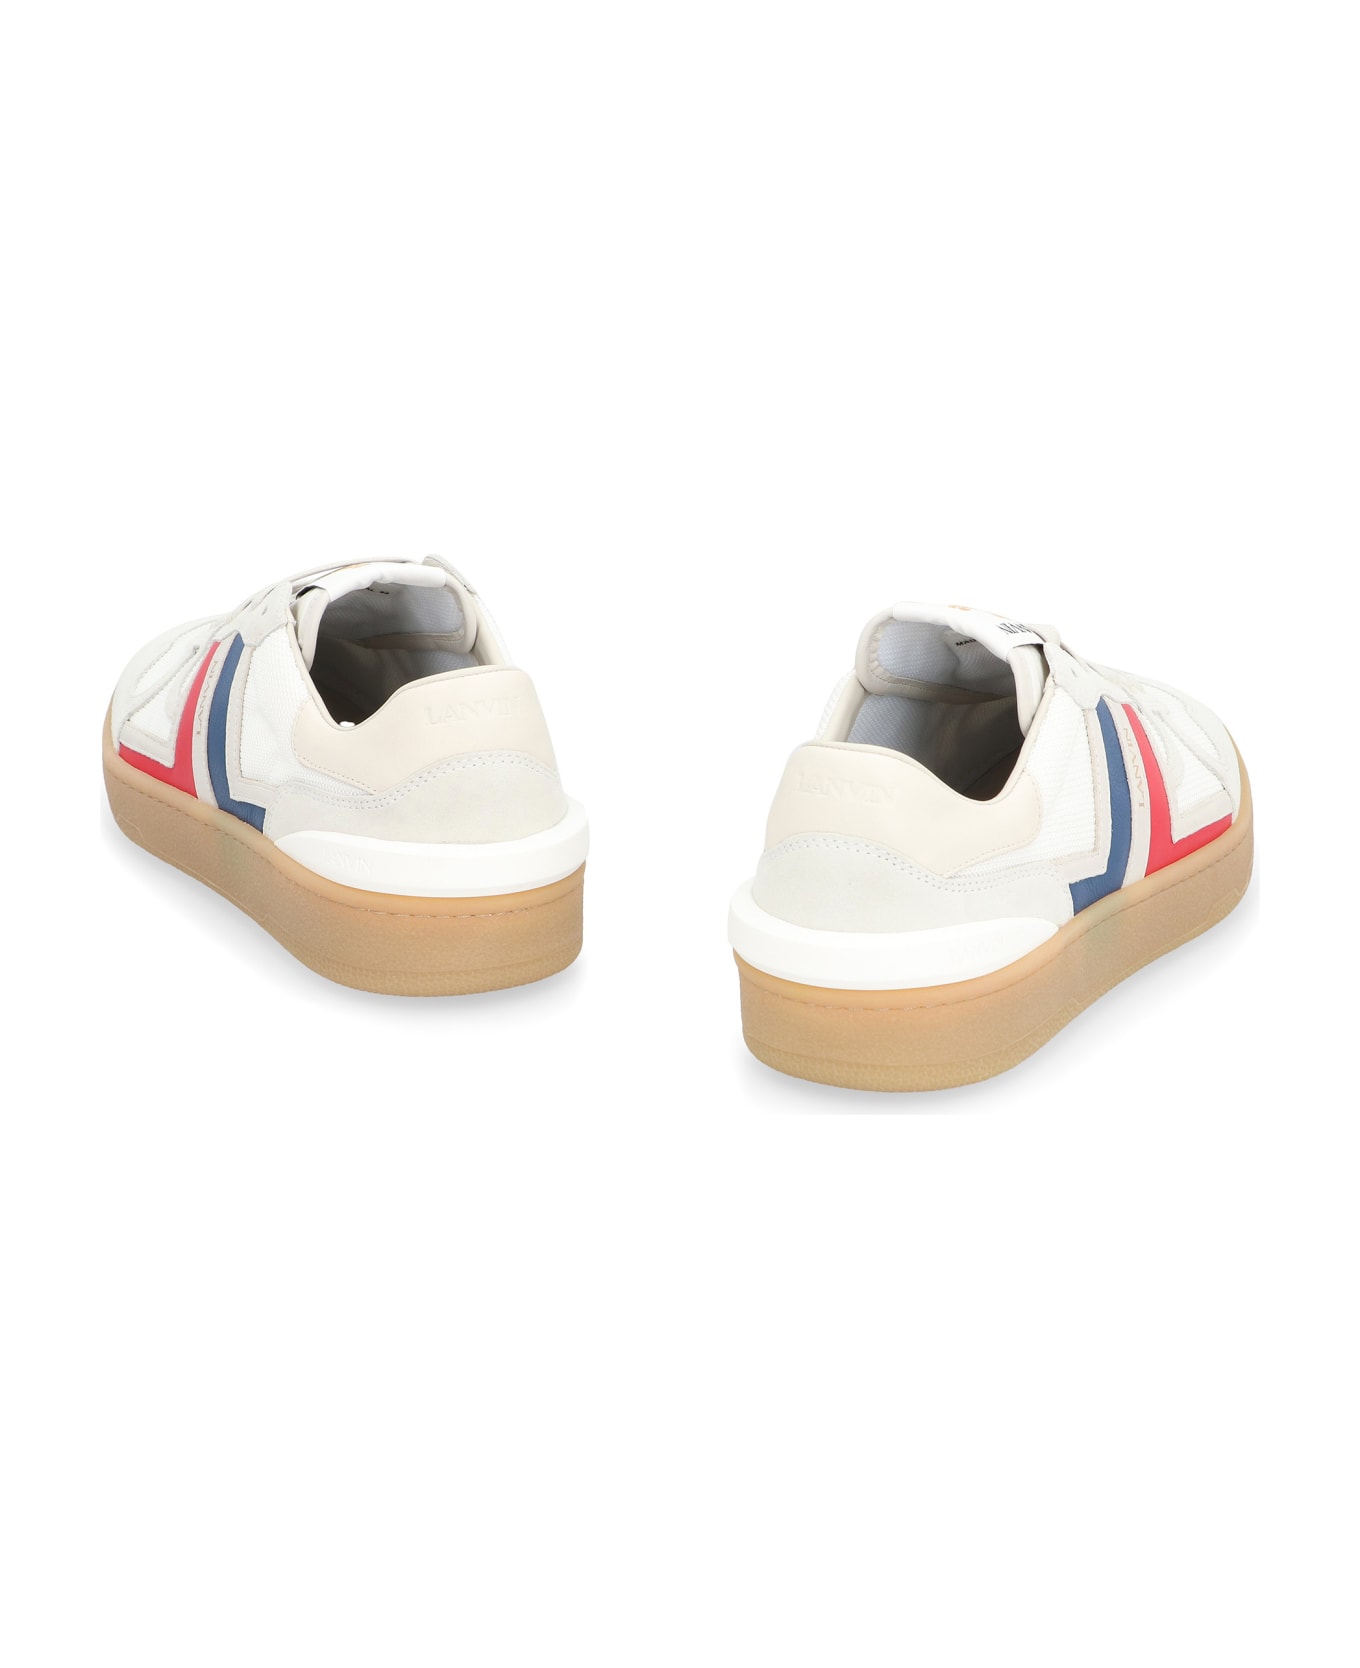 Lanvin Clay Low-top Sneakers - White スニーカー